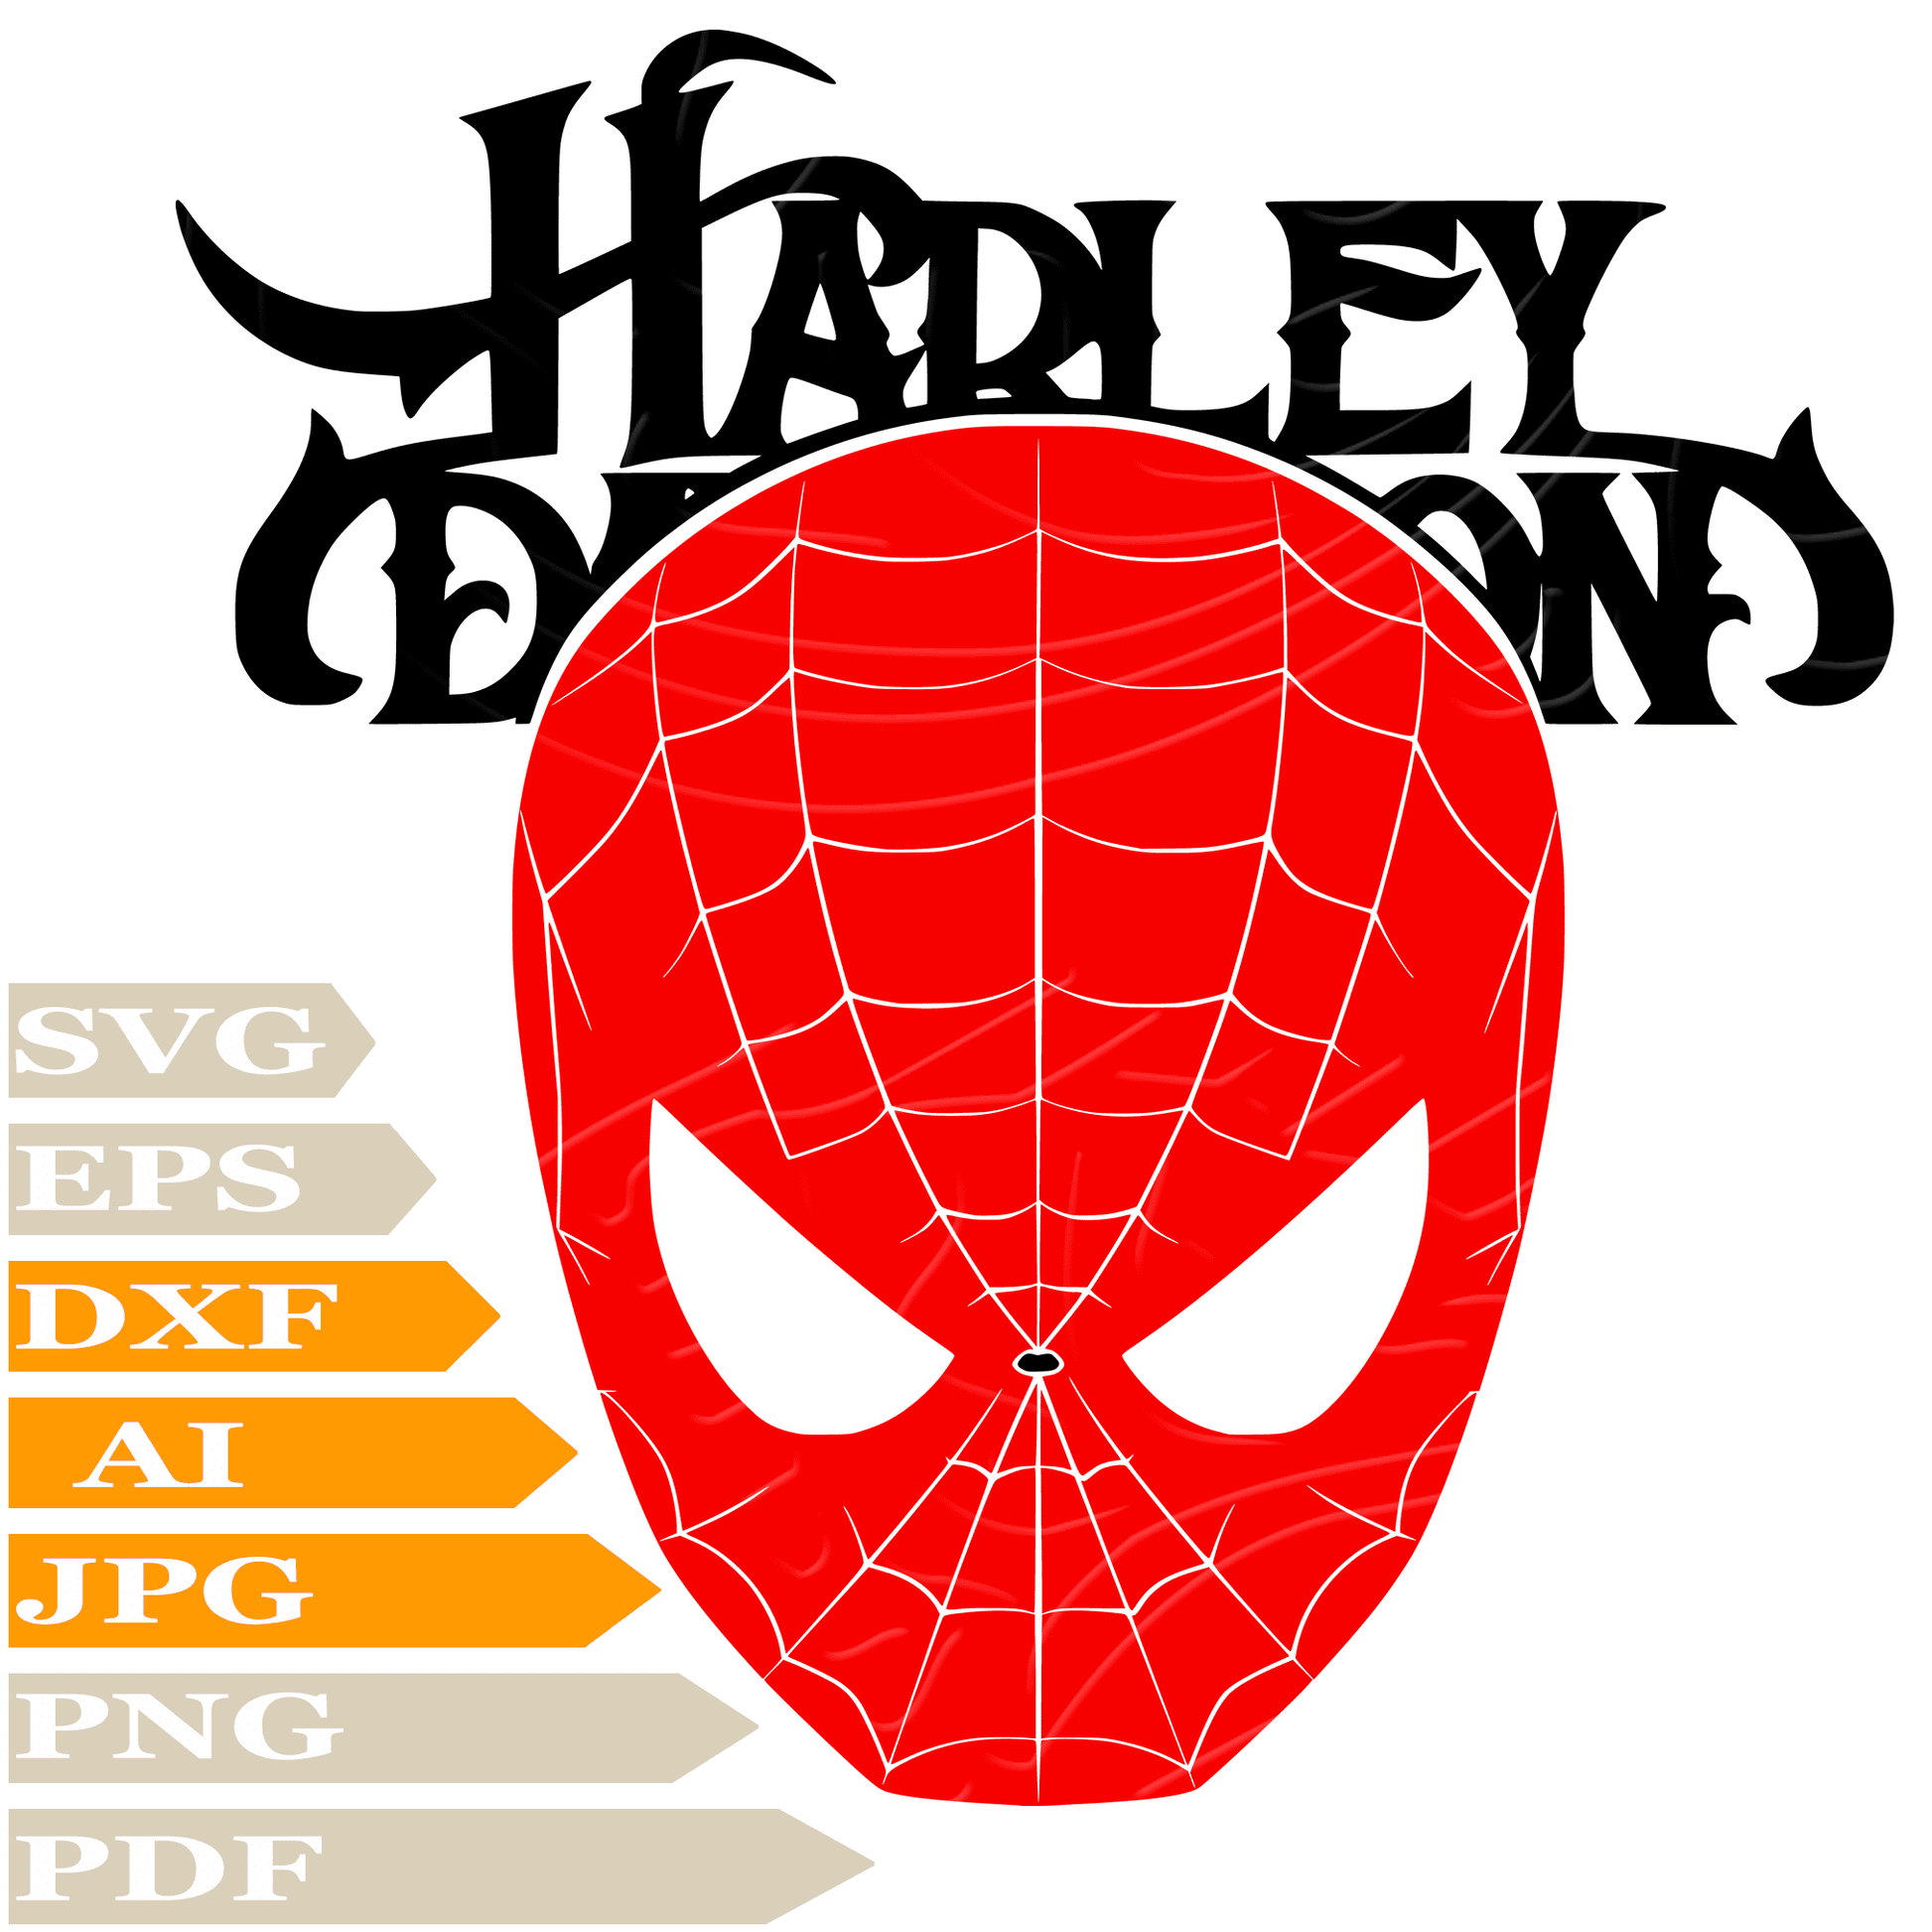 Spiderman SVG-Spiderman Head SVG File-Spiderman Harley Davidson Drawing SVG-Spiderman Harley Davdson Vector Clip art-Image Cut Files-Illustration-PNG-For Cricut -Instant download-For Shirts-Silhouette